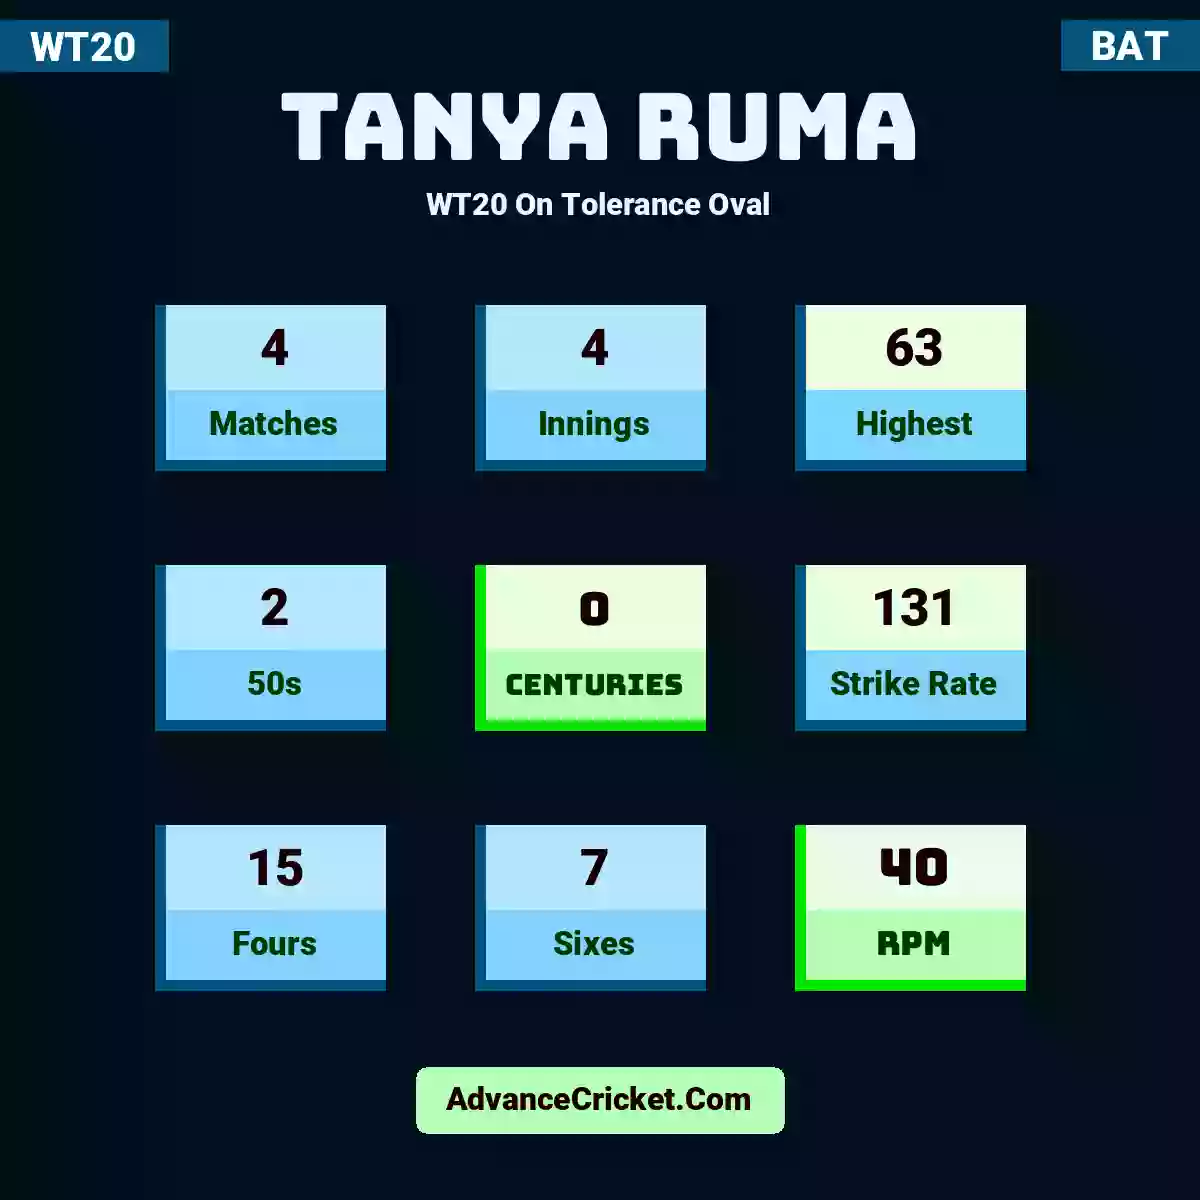 Tanya Ruma WT20  On Tolerance Oval, Tanya Ruma played 4 matches, scored 63 runs as highest, 2 half-centuries, and 0 centuries, with a strike rate of 131. T.Ruma hit 15 fours and 7 sixes, with an RPM of 40.